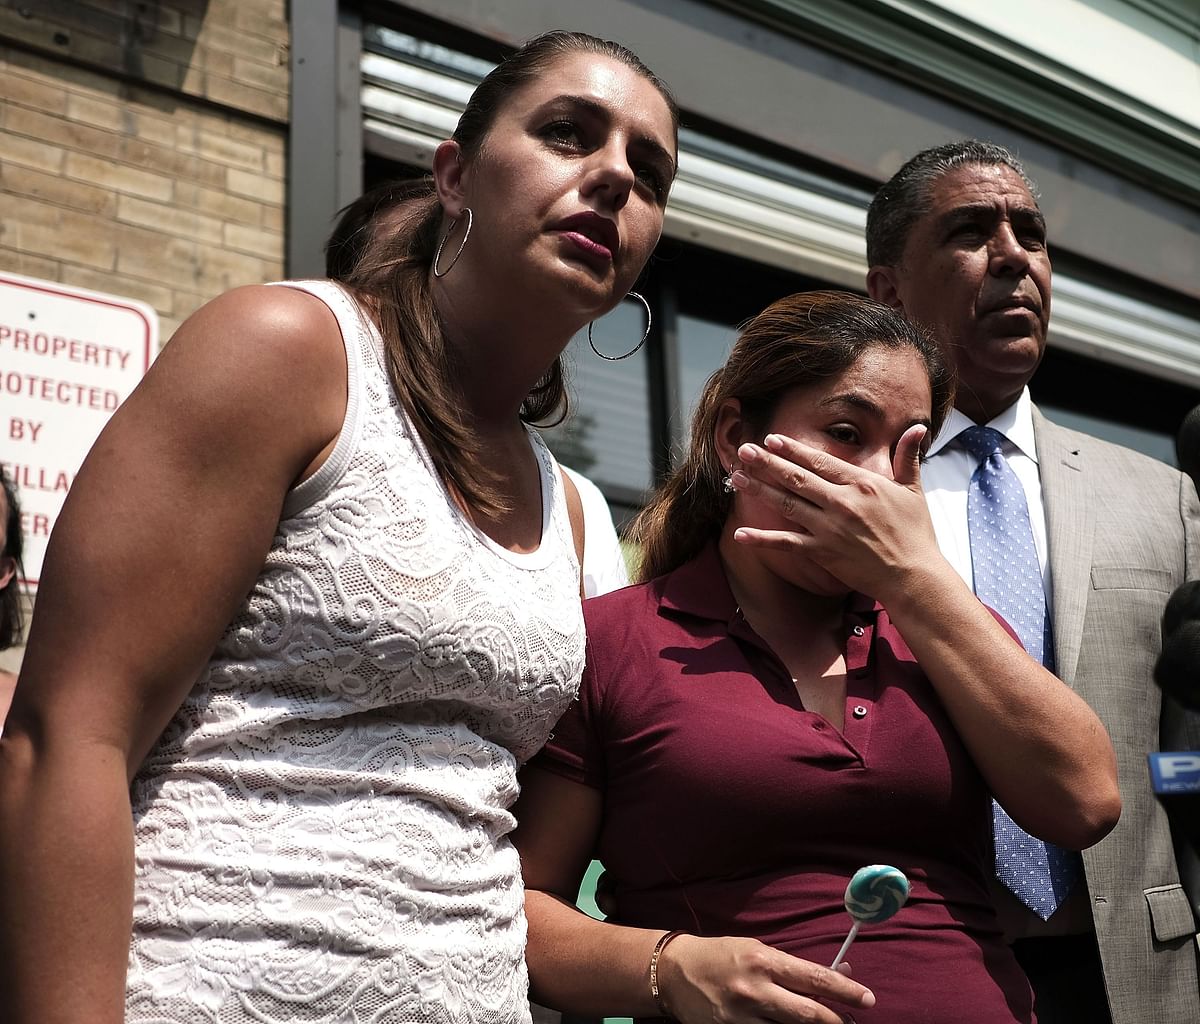 Yeni Maricela Gonzalez Garcia (center) stands with Janey Pearl and Democratic Congressman Adriano Espaillat as she speaks with the news media following a visit with her children at the East Harlem Cayuga Centers on 3 July 2018 in New York City. Photo: AFP